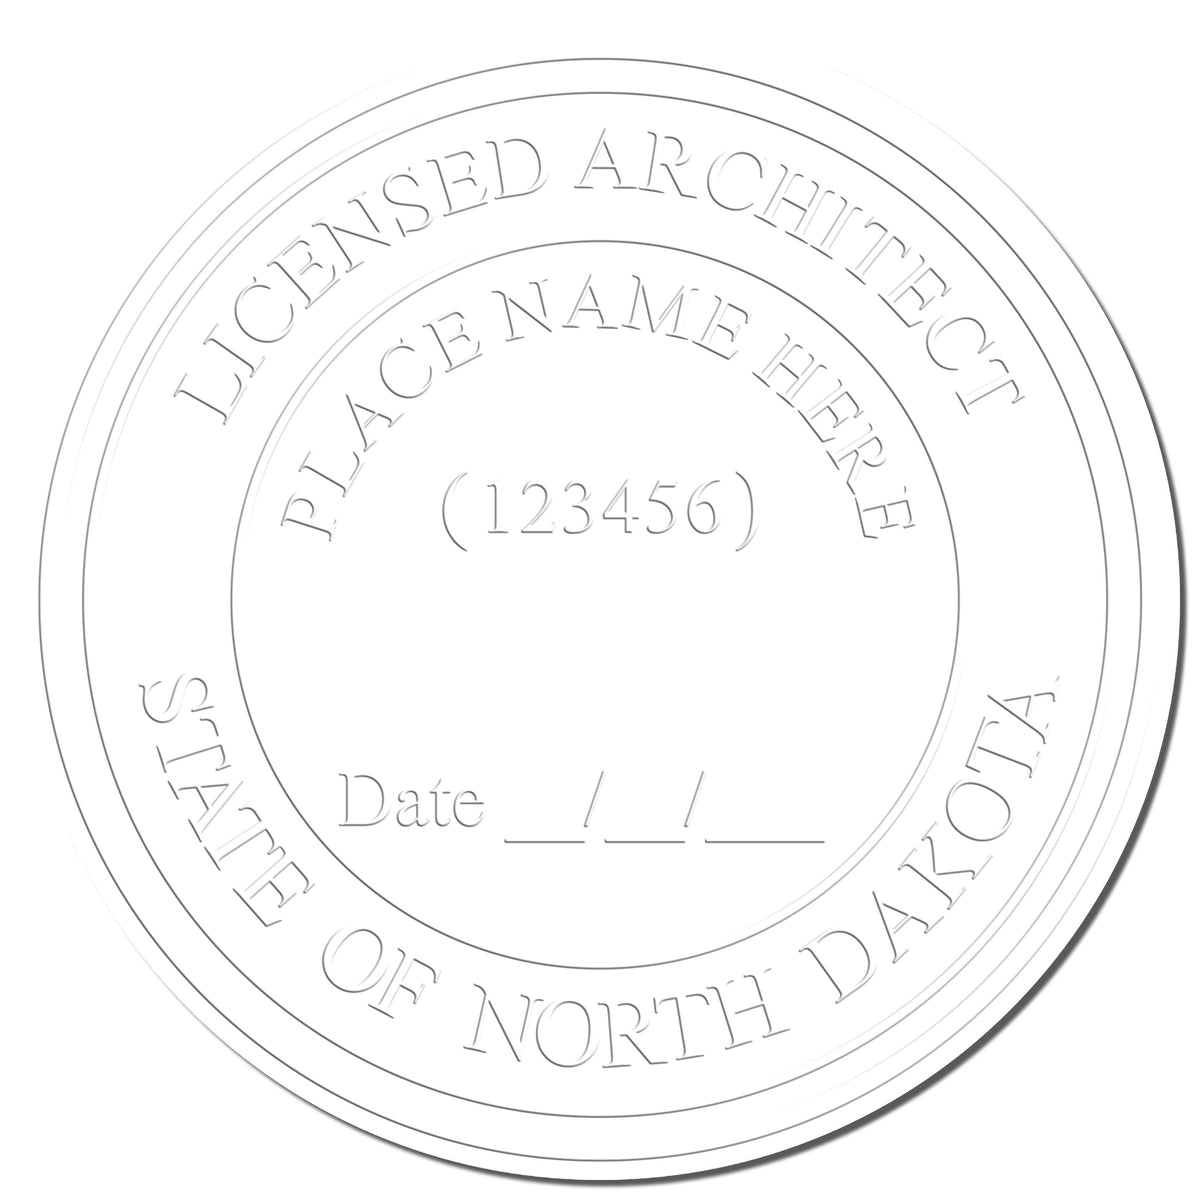 A photograph of the North Dakota Desk Architect Embossing Seal stamp impression reveals a vivid, professional image of the on paper.